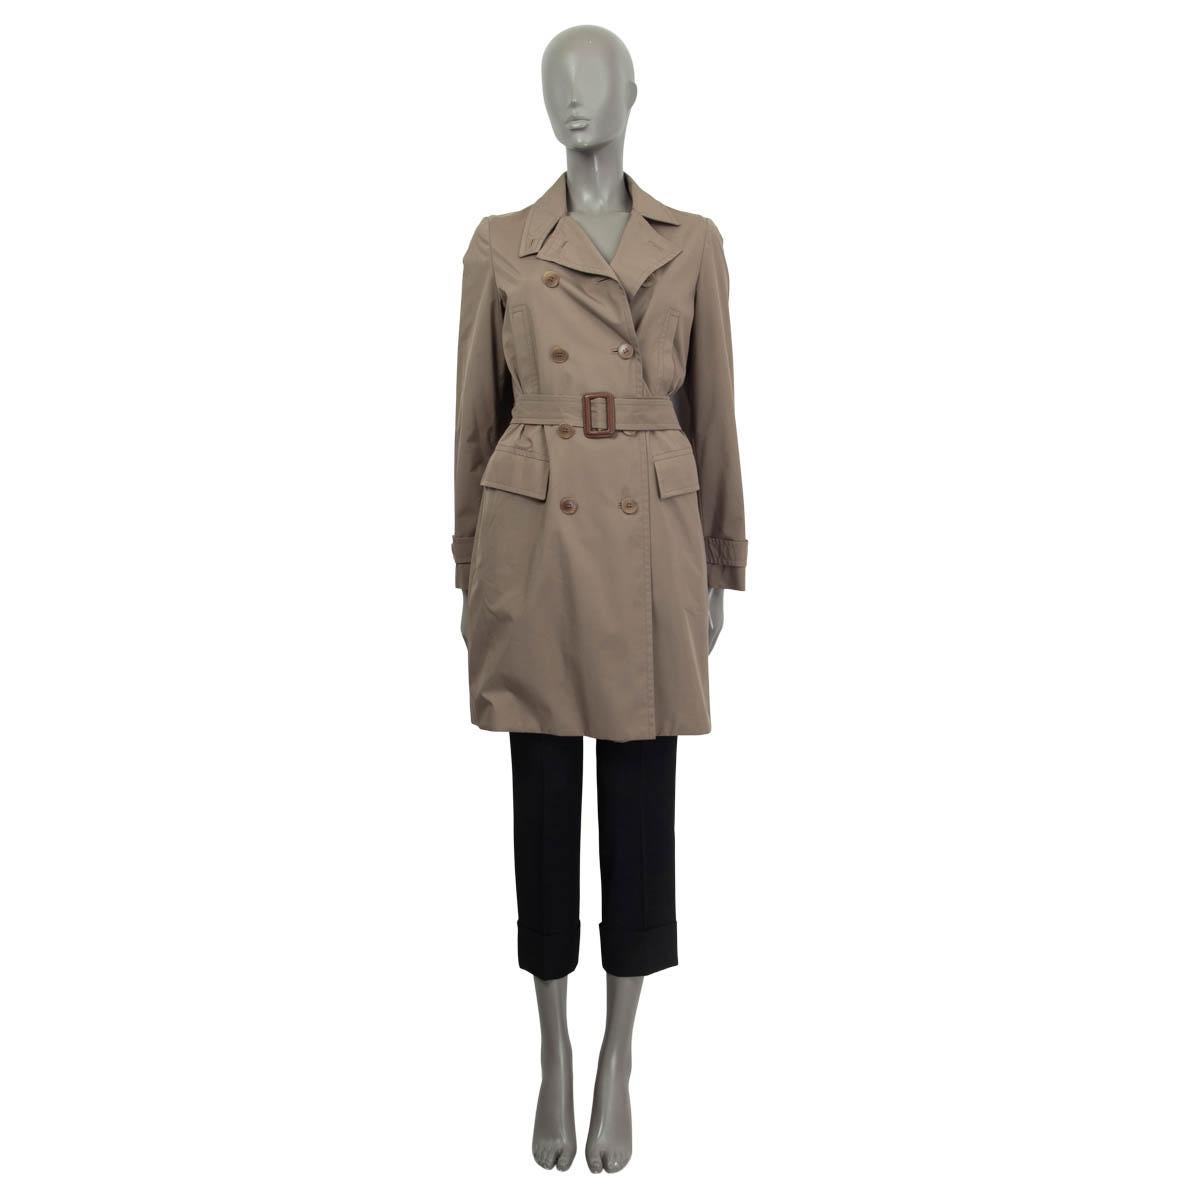 100% authentic Loro Piana double breasted trench coat in khaki polyester (80%) and polyurethane (20%). Features a belt, two flap pockets and one slit pocket on the front. Has buttoned cuffs and a notch collar. Opens with four khaki buttons on the